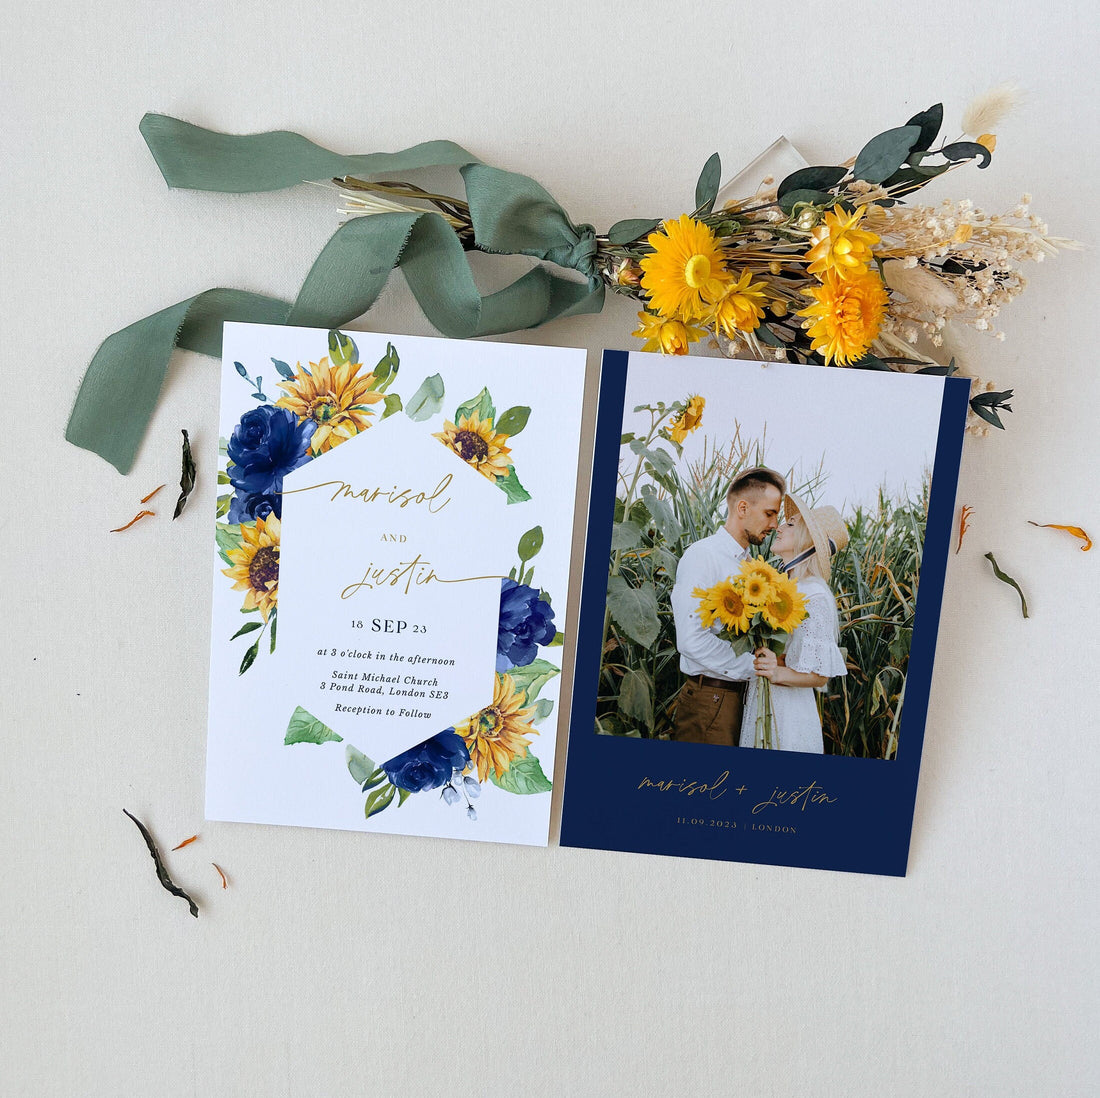 IVY Wedding Invites with Sunflowers Template